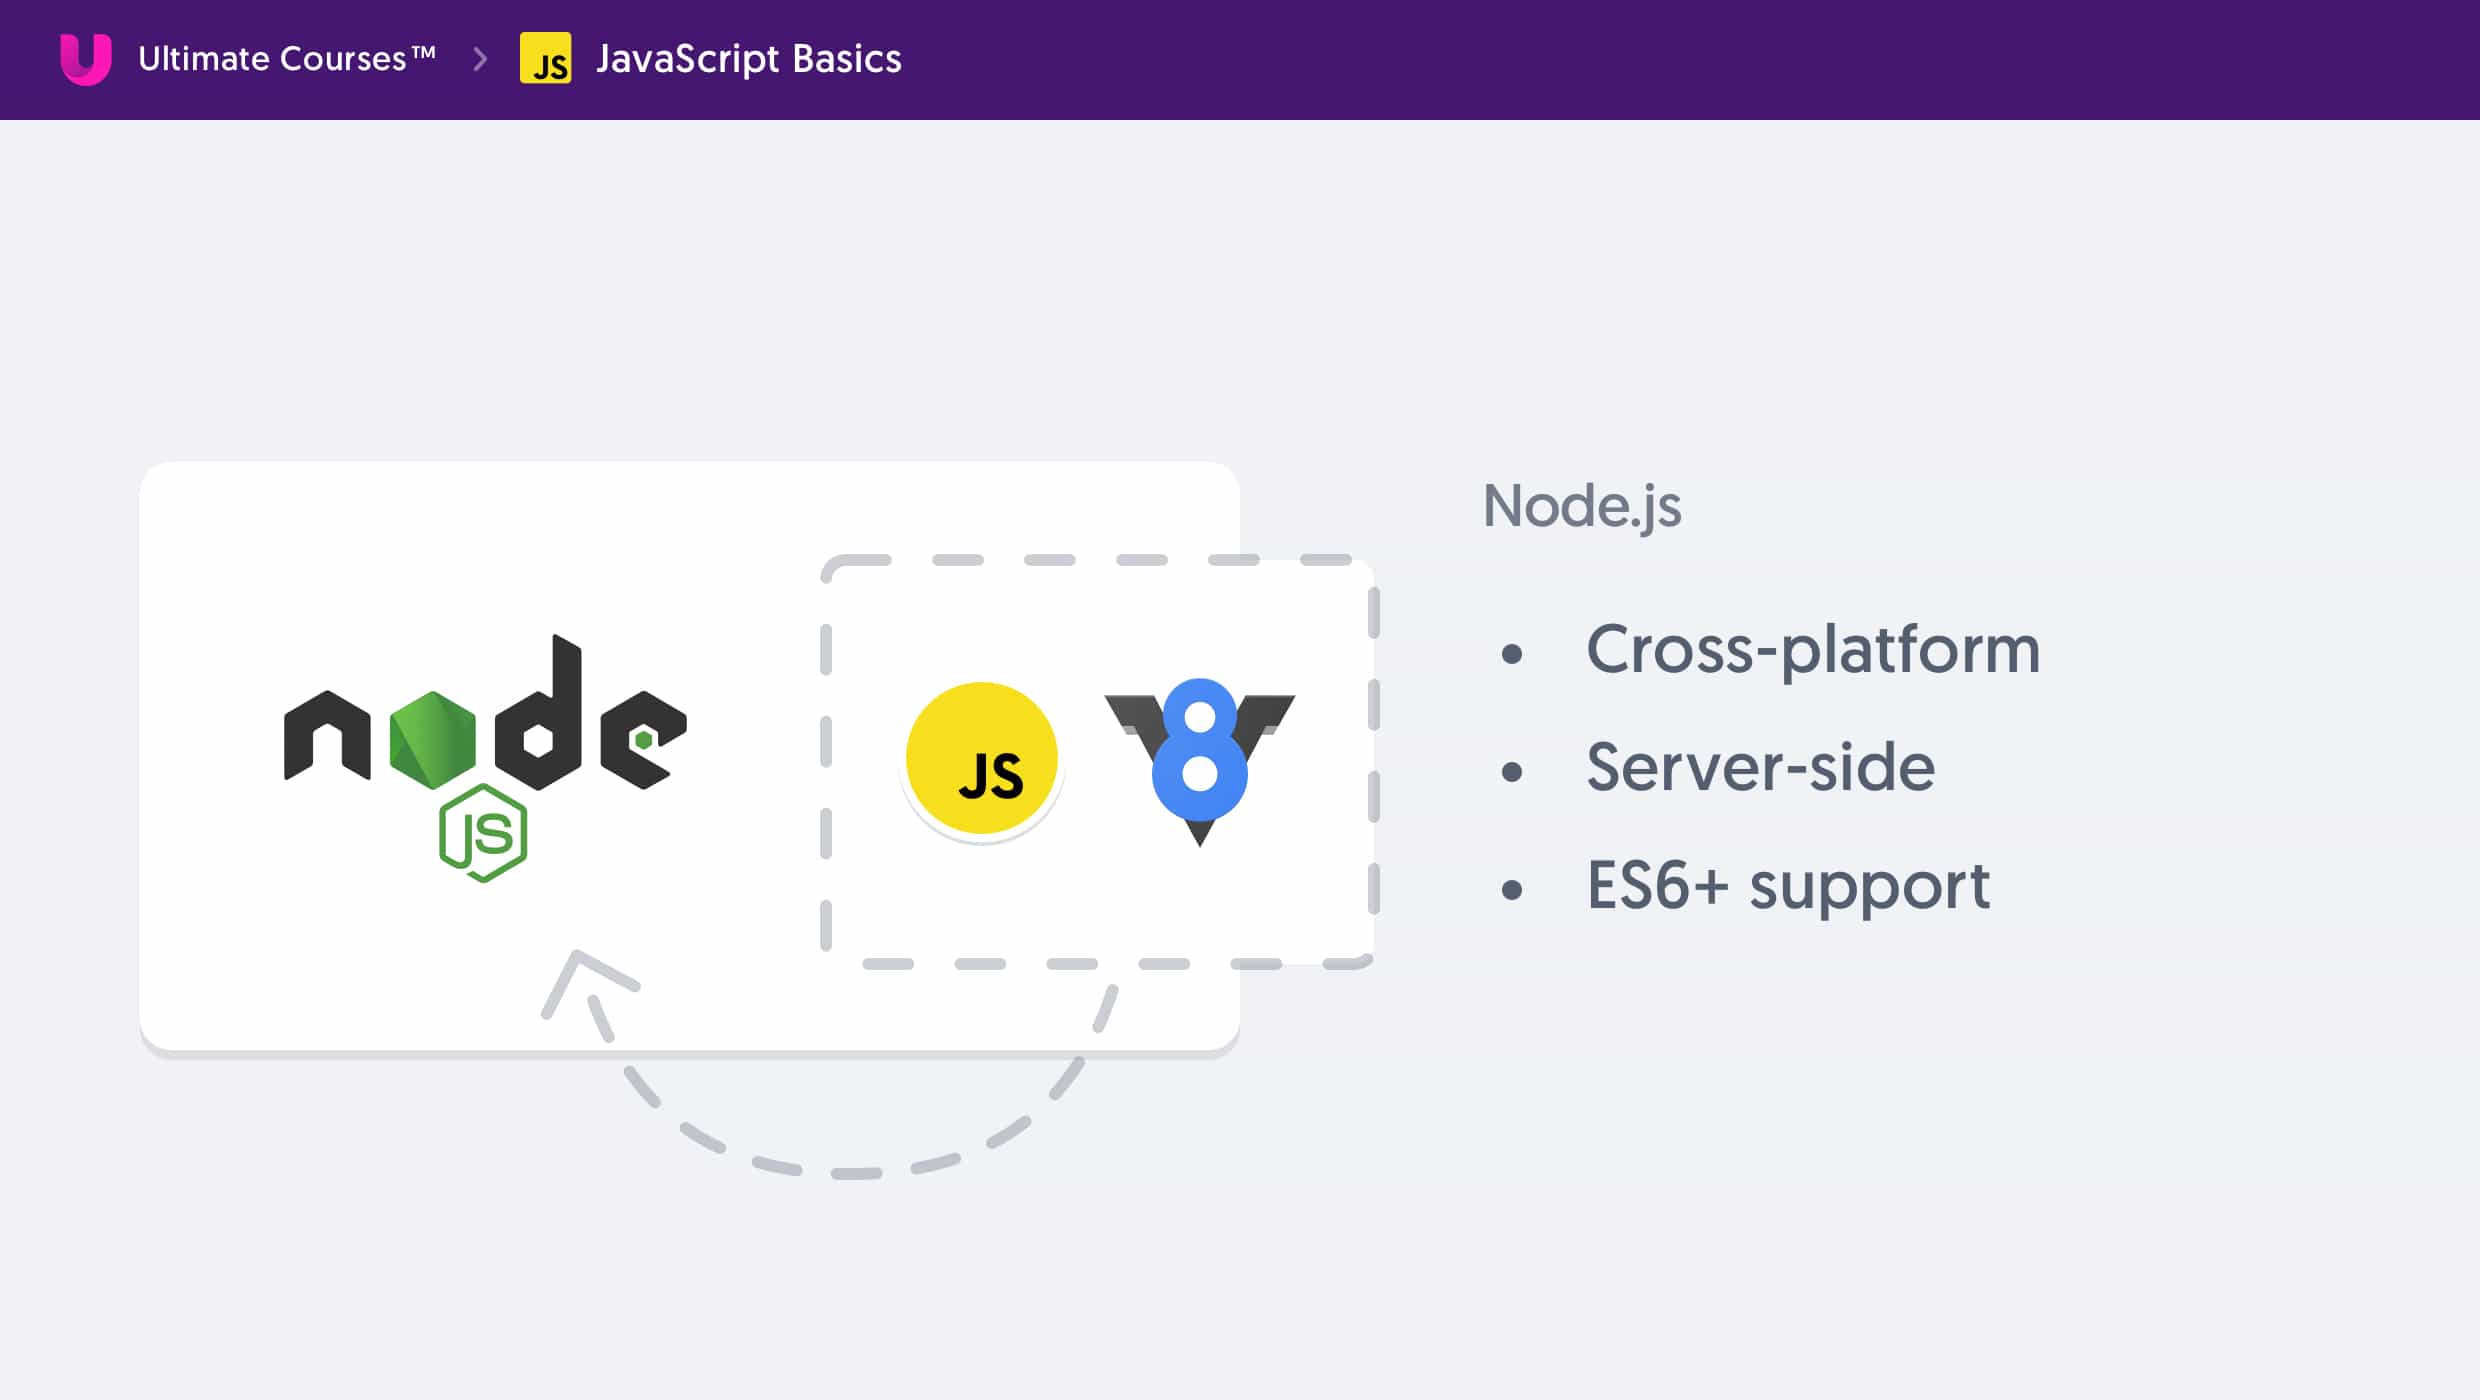 Introducing NodeJS and how it used Google Chrome's V8 JavaScript engine